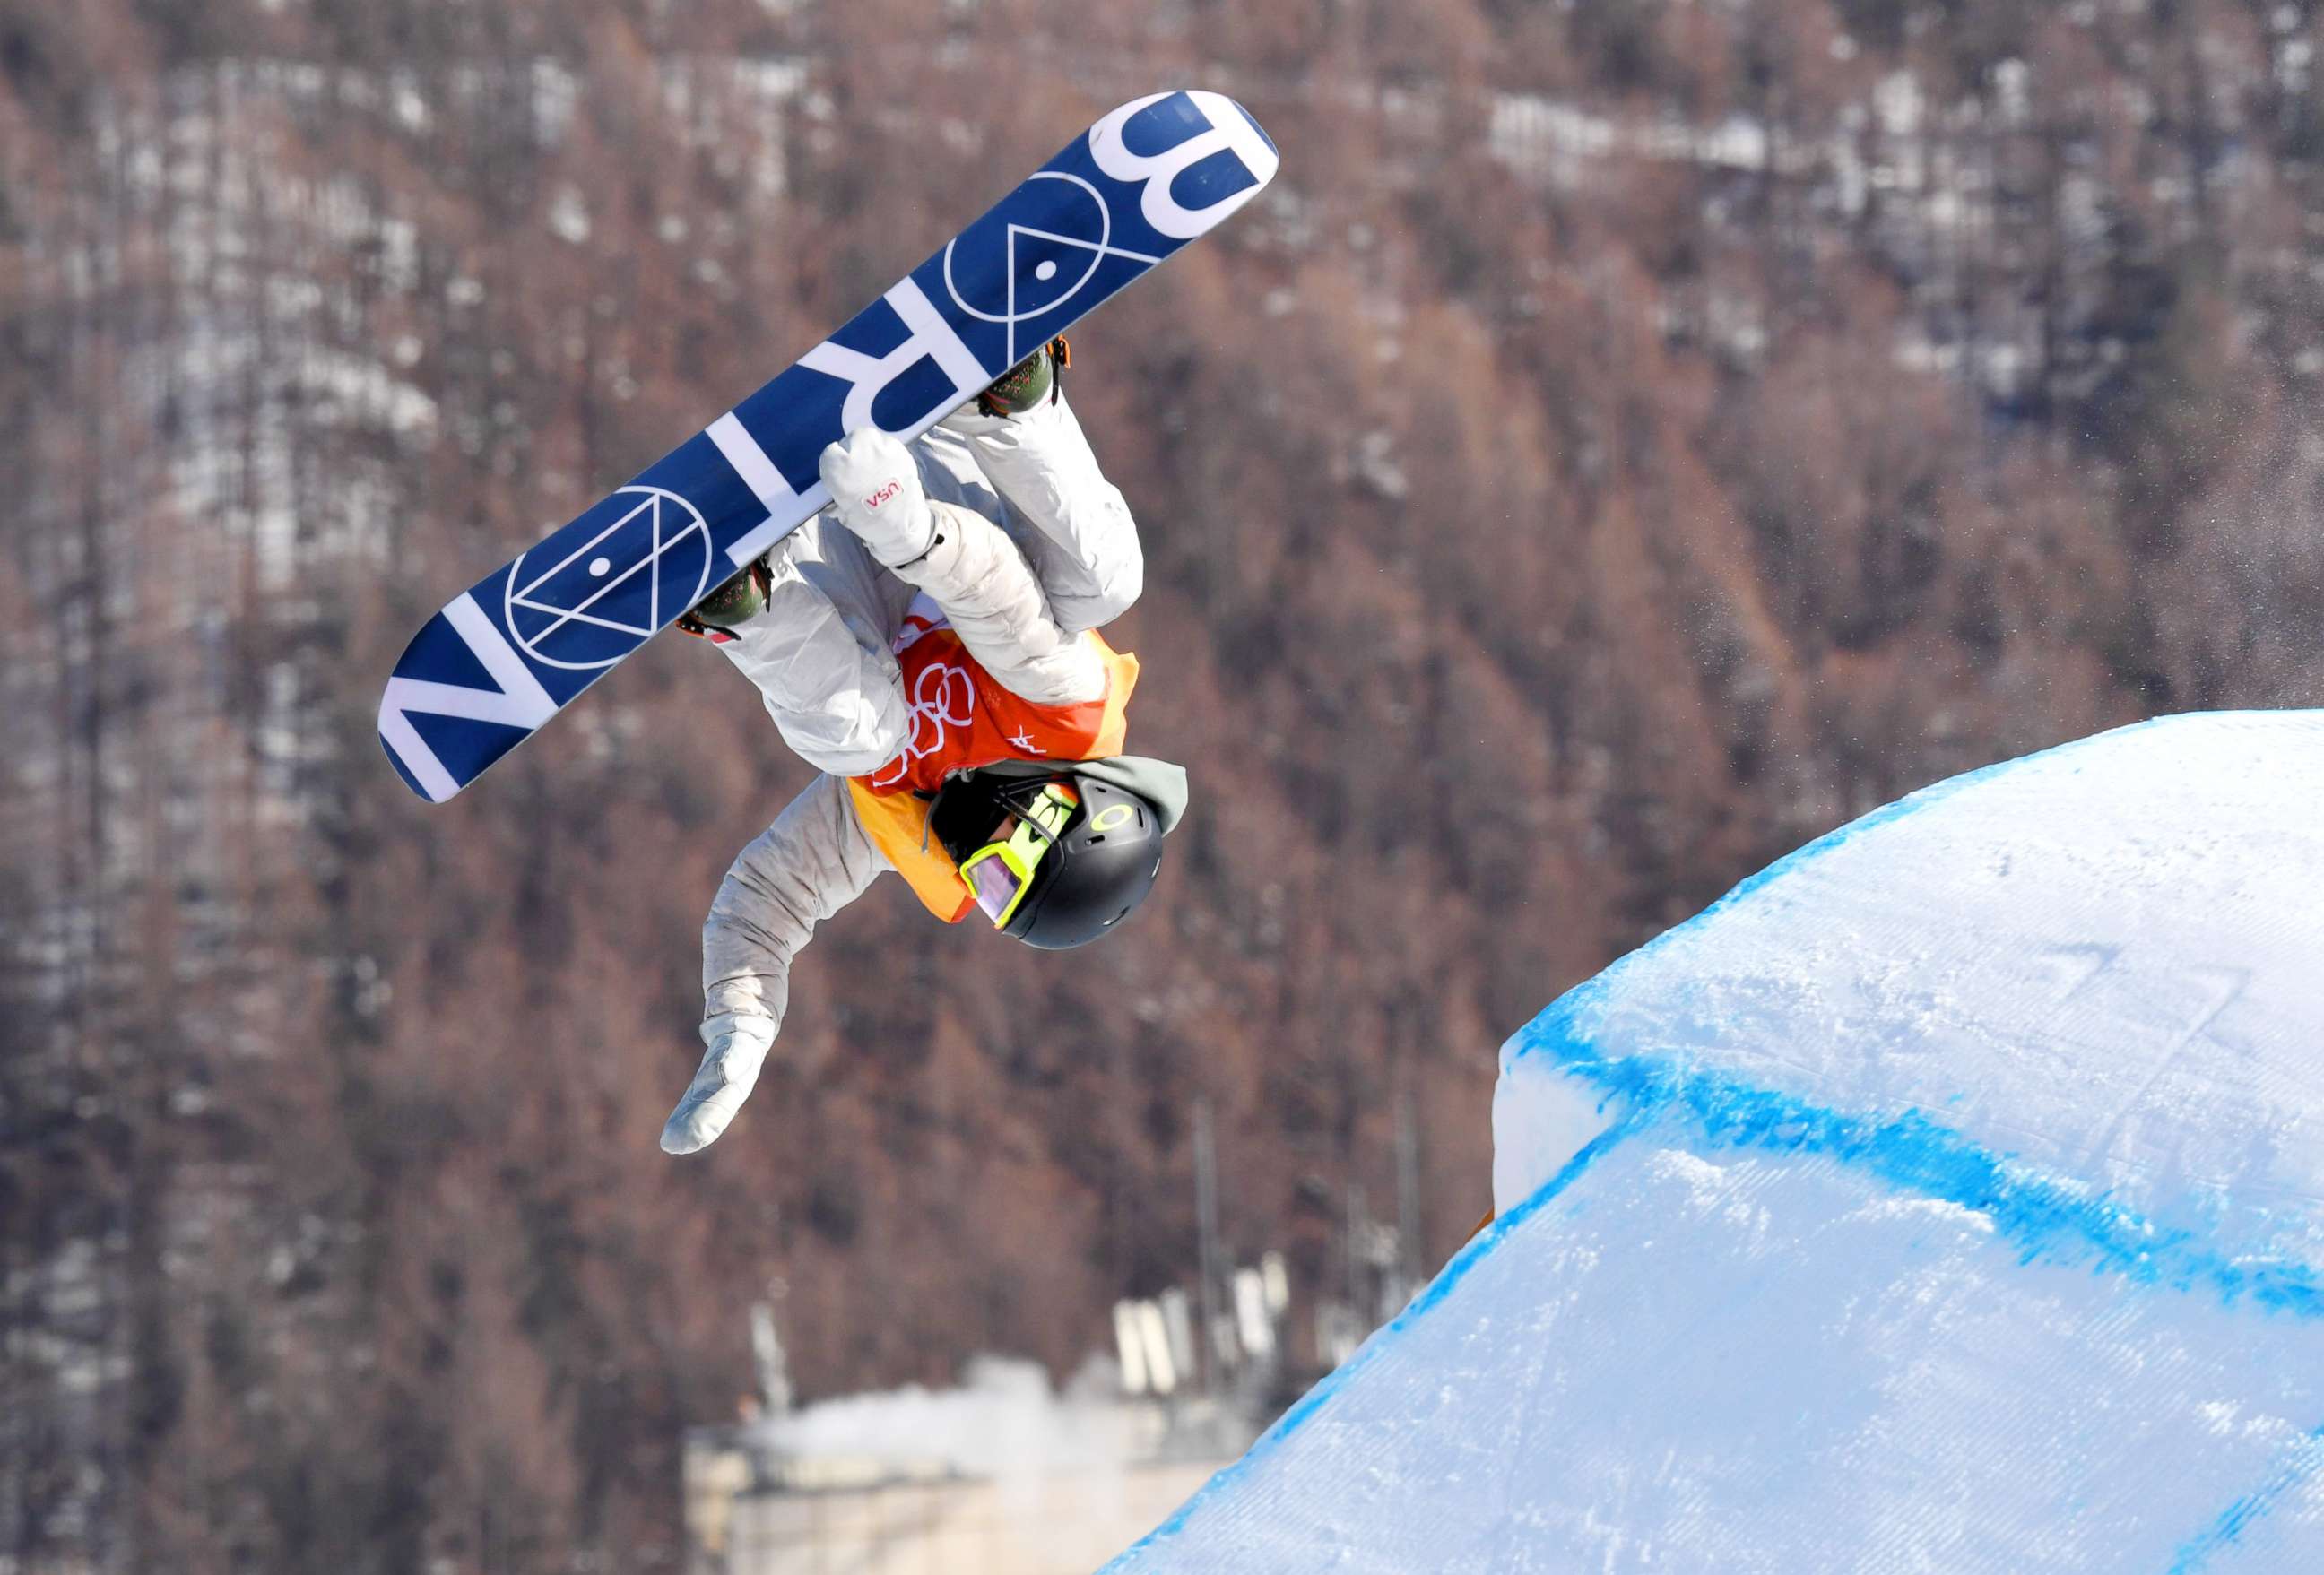 PHOTO: American Redmond Gerard takes to the air on his way to winning the gold medal in the men's slopestyle snowboarding event at the Pyeongchang Winter Olympics in South Korea on Feb. 11, 2018.